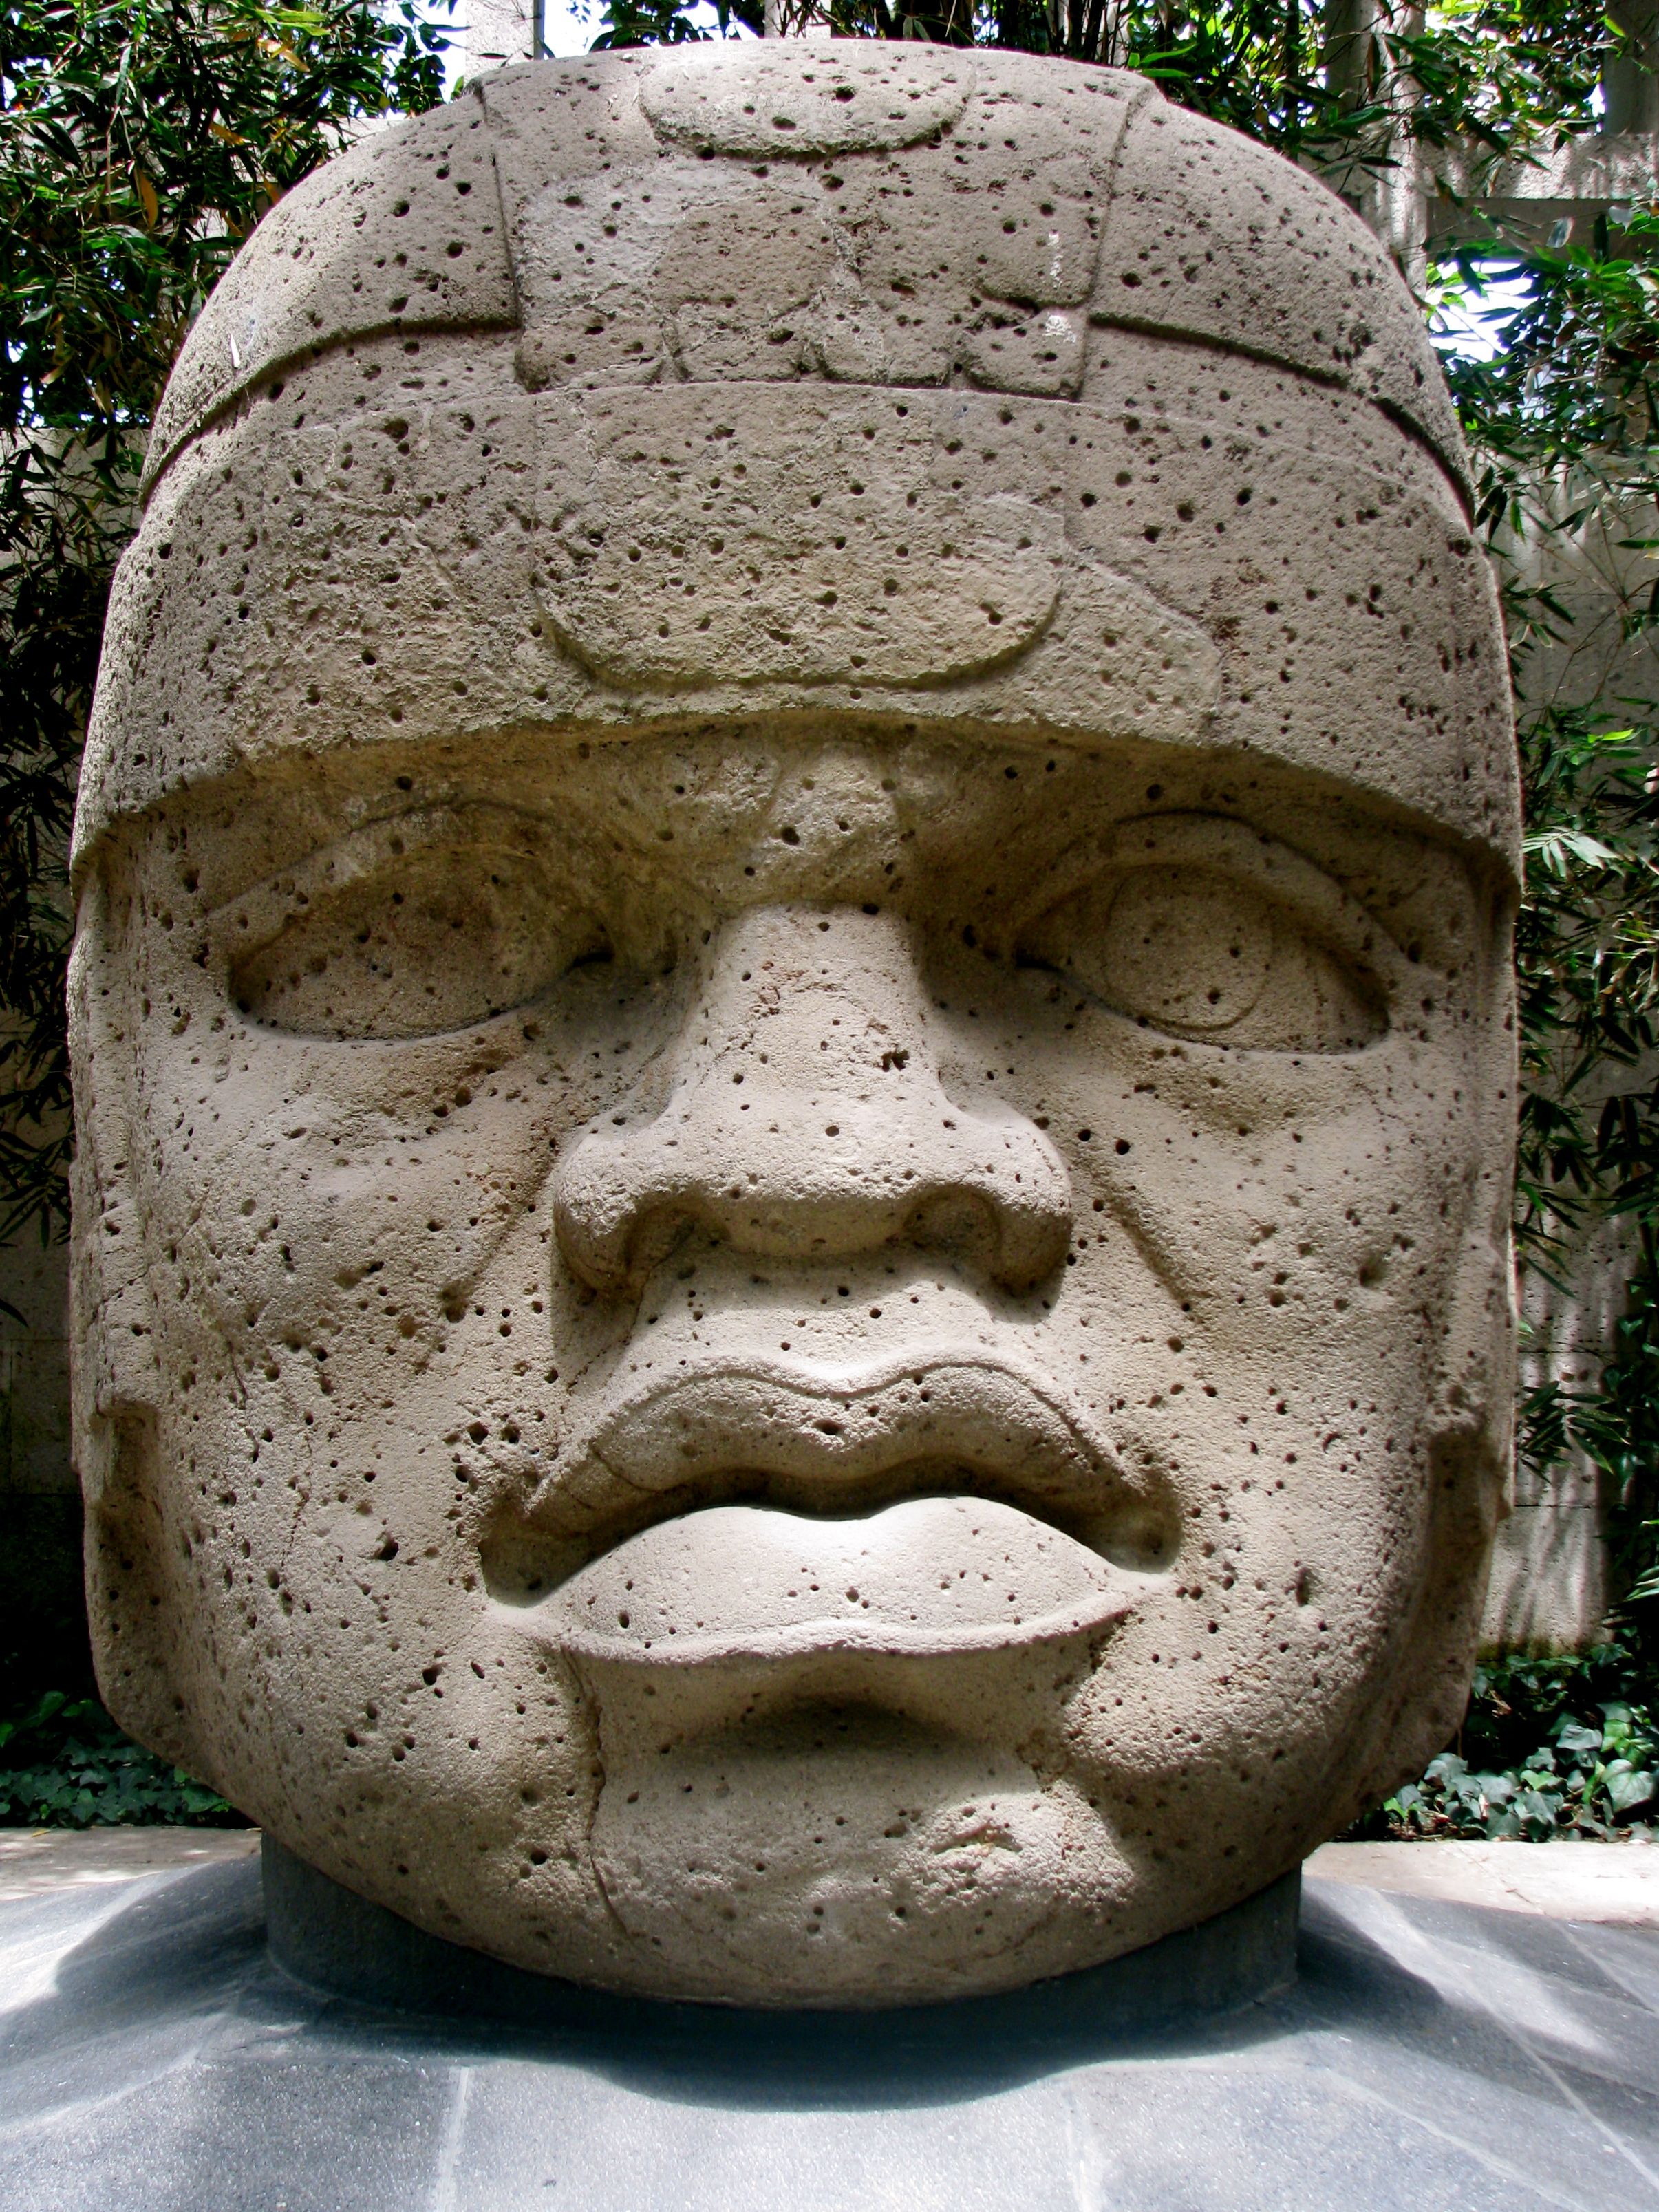 2-These giant head sculptures were created by the ancient Olmec ...